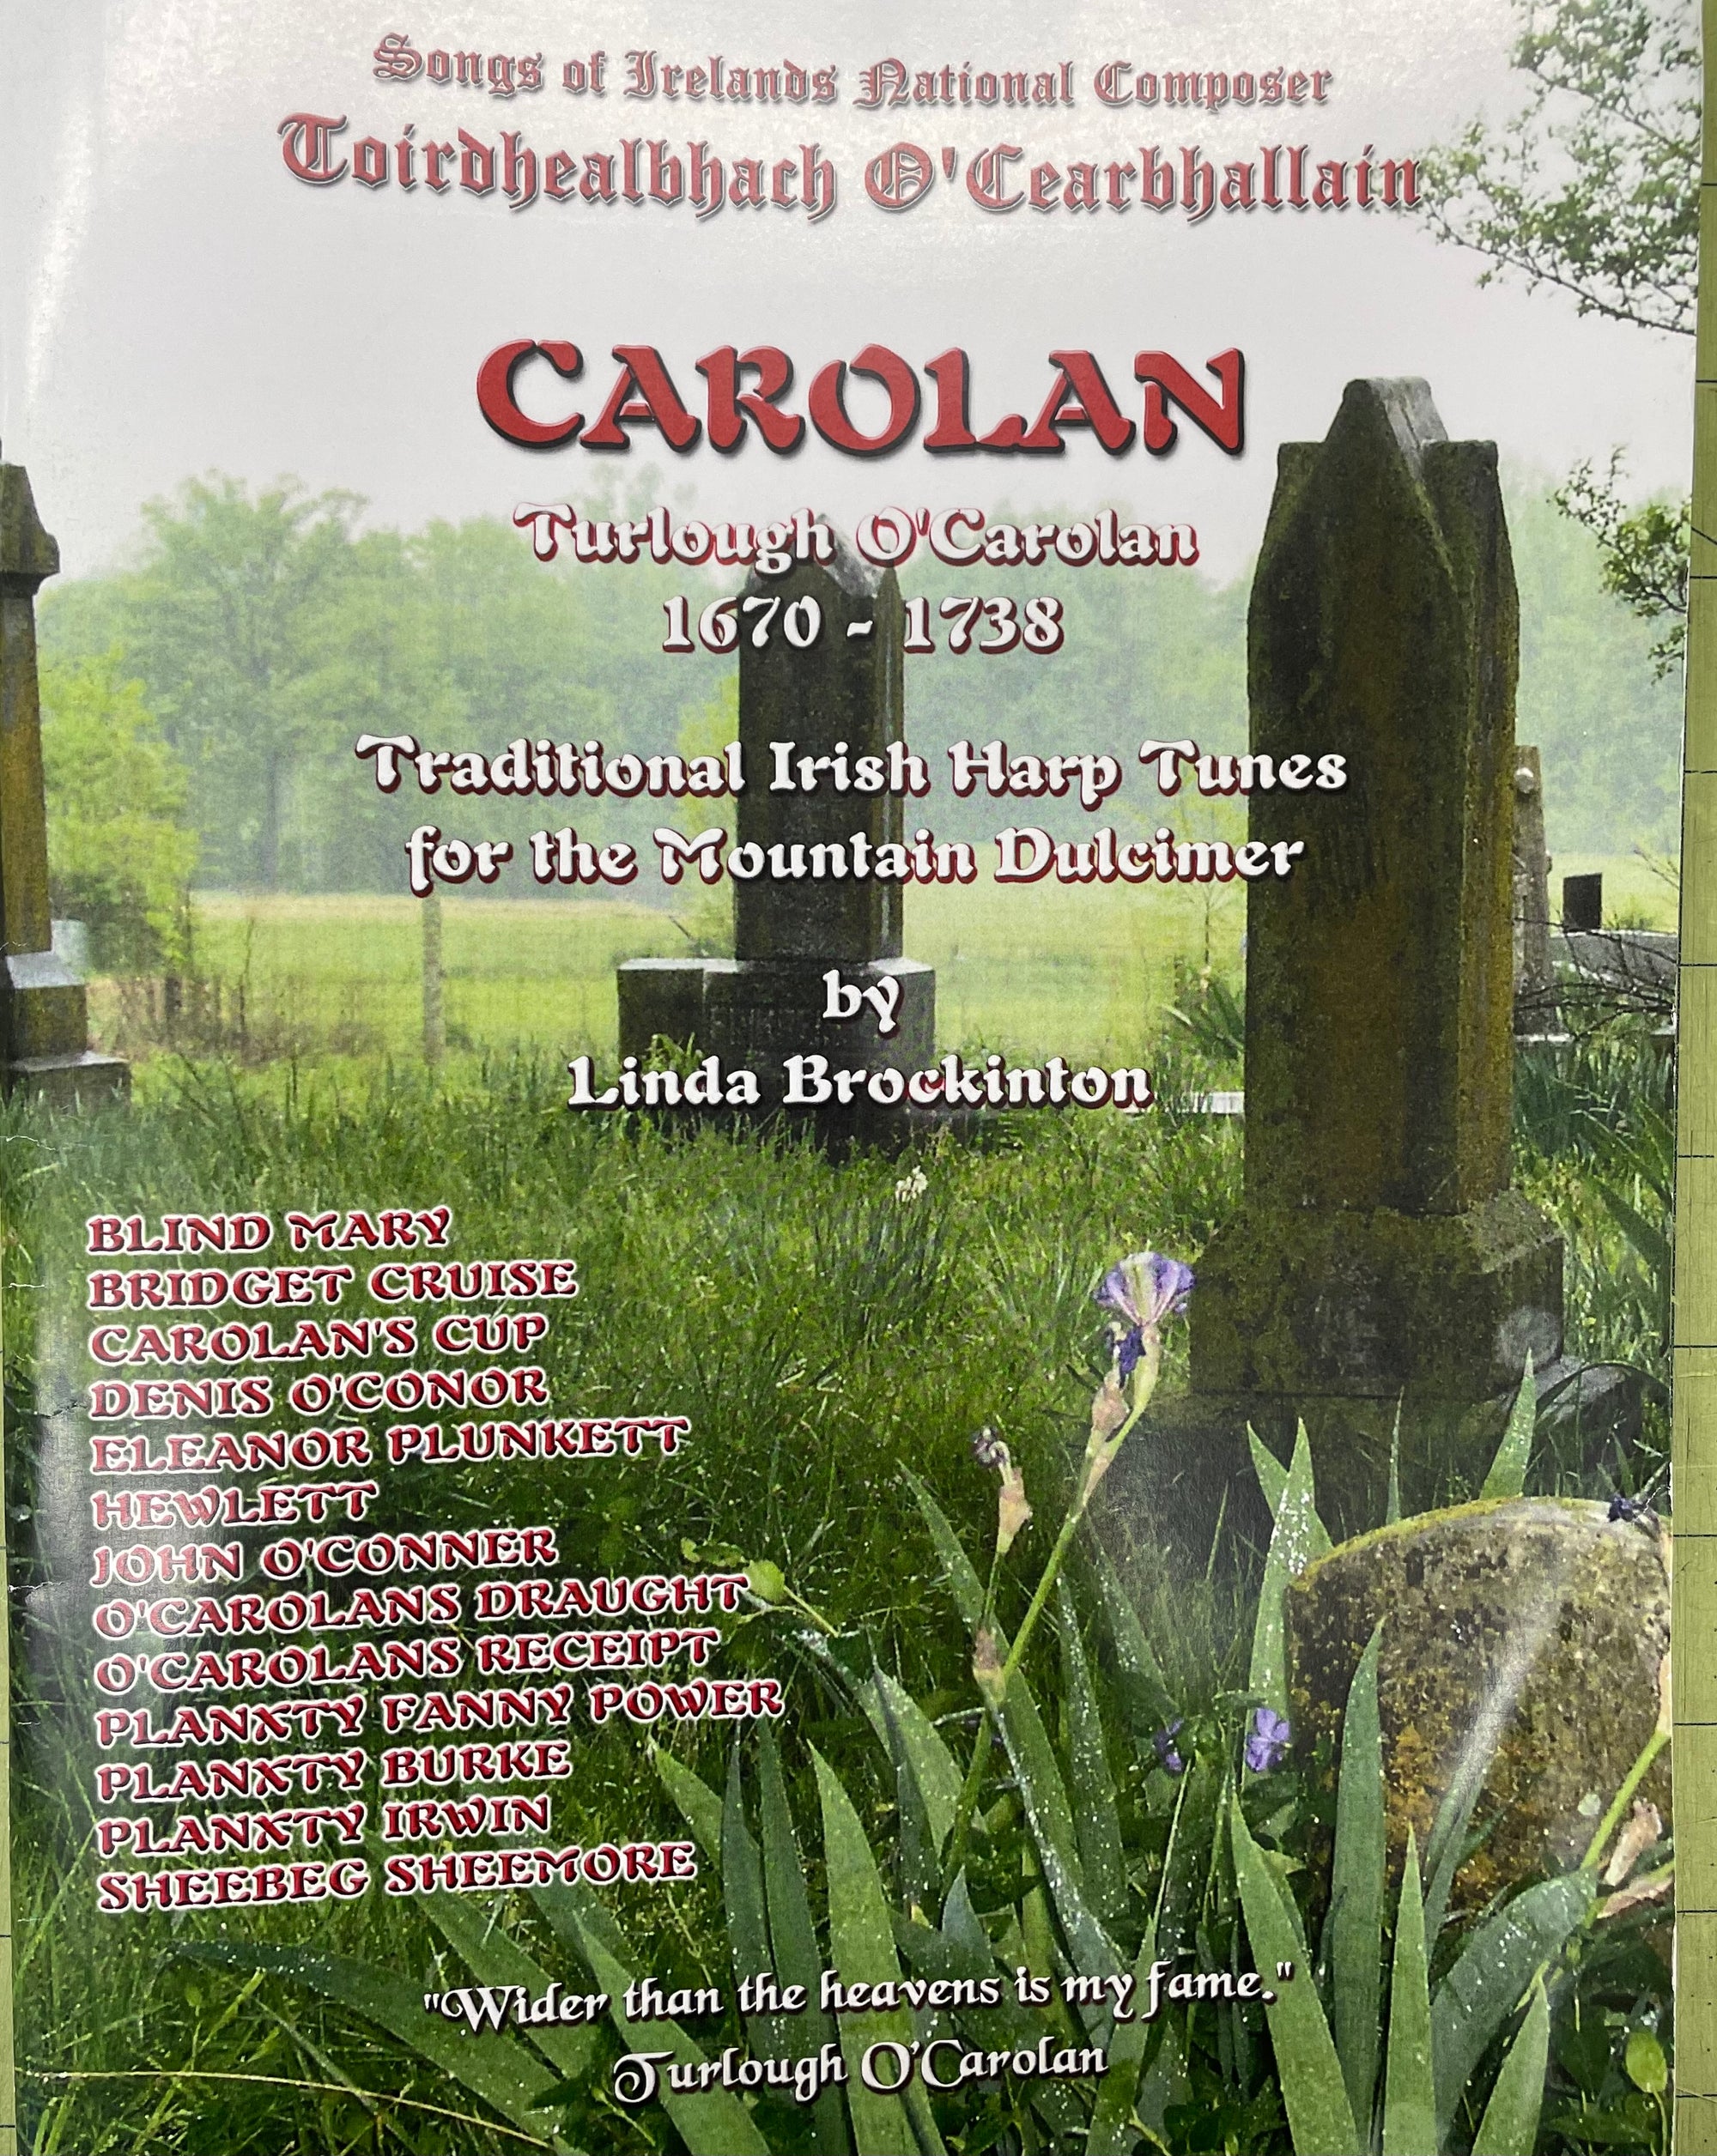 Image of an instruction book cover titled "Carolan - Traditional Irish Harp Tunes for the Mountain Dulcimer" by Linda Brockinton, featuring a graveyard with Celtic crosses and a blurred green background. Text lists traditional Irish harp tunes by Turl